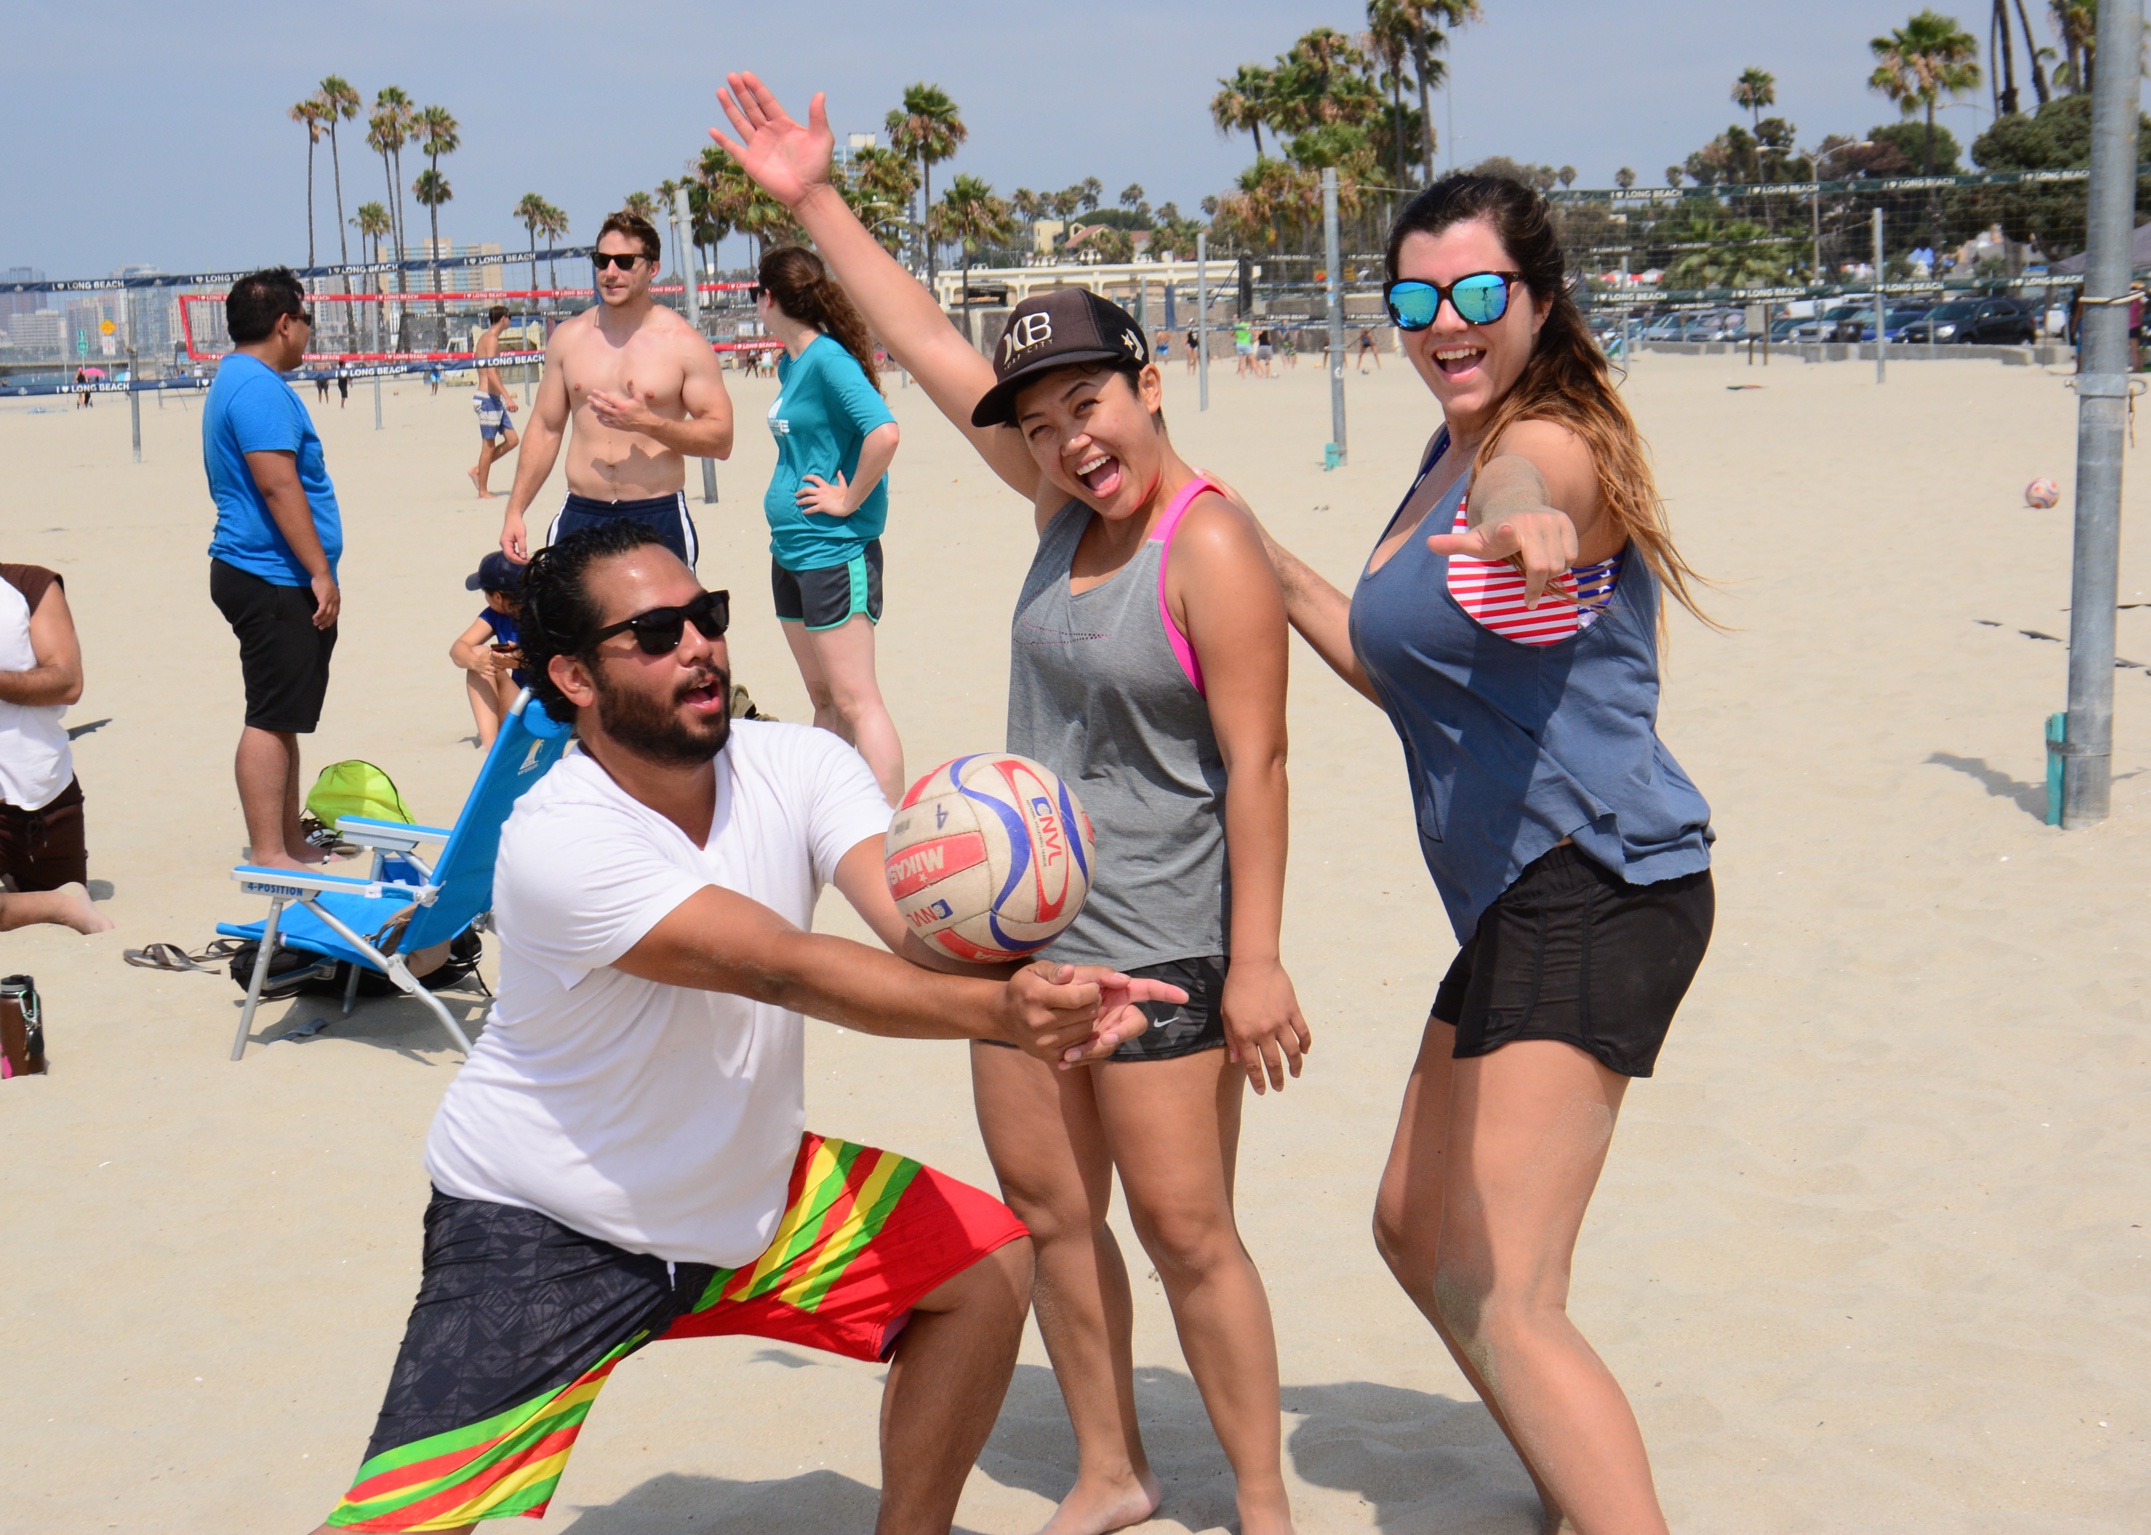 Winter Express Draw 4s Coed Beach Volleyball League In Long Beach 2641